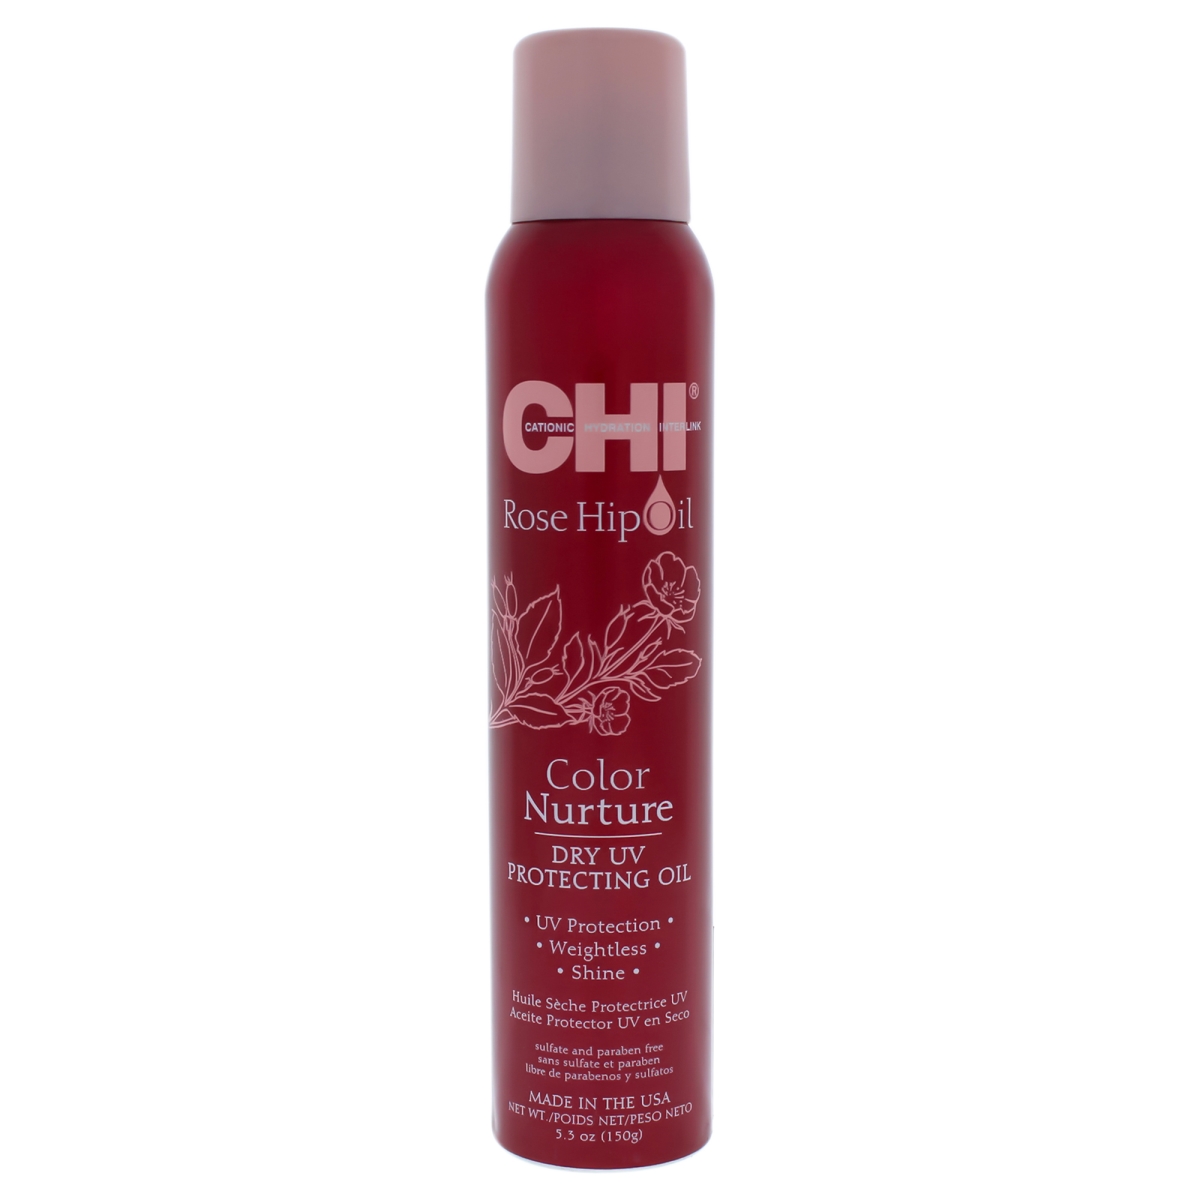 Picture of CHI I0084089 Rose Hip Oil Color Nurture UV Protecting Dry Oil for Unisex - 5.3 oz